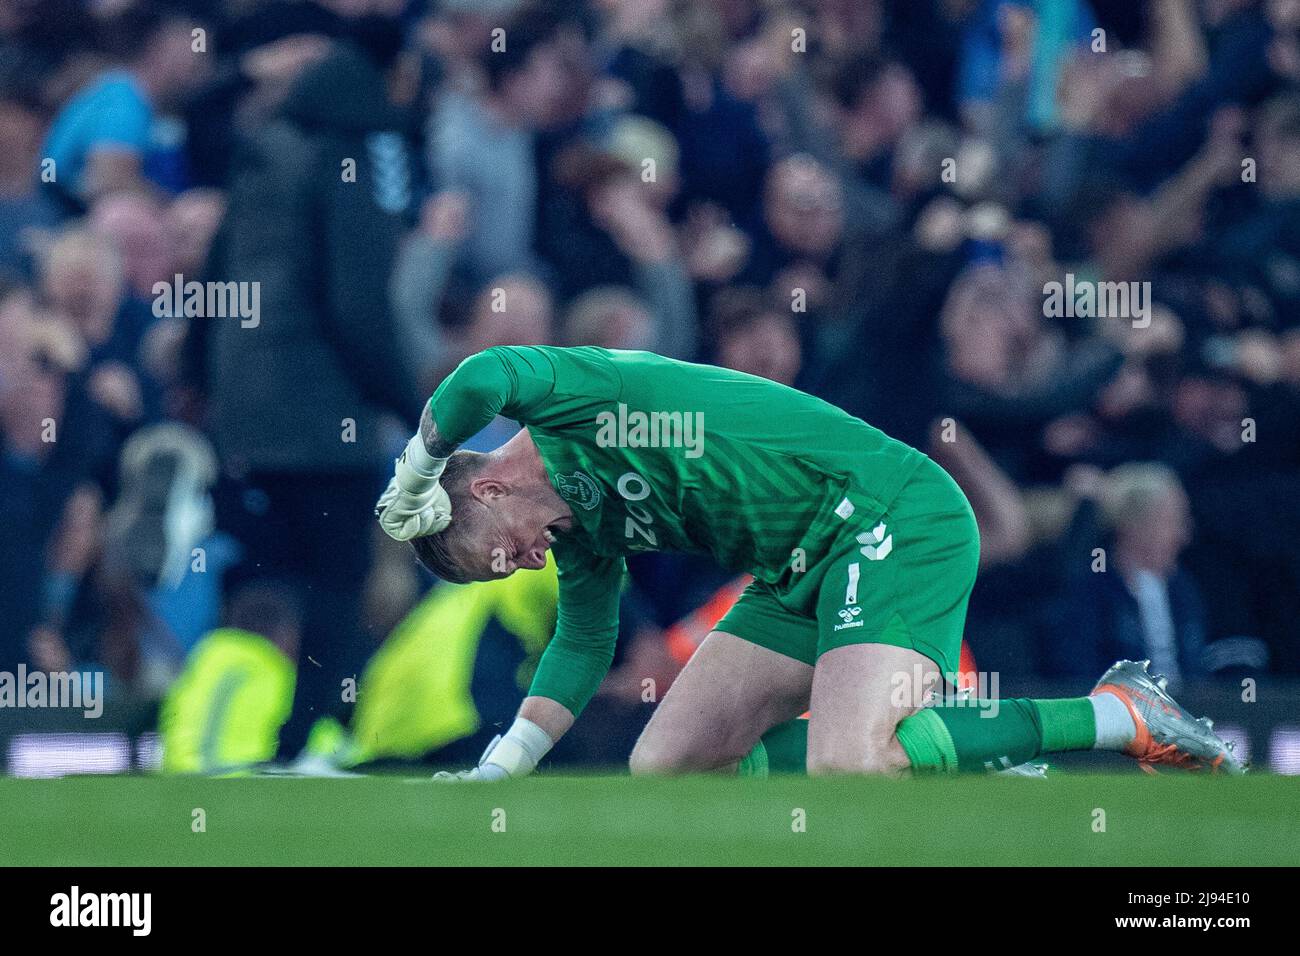 LIVERPOOL, ENGLAND - MAY 19: Jordan Pickford of Everton celebrates after his team score 3rd goal during the Premier League match between Everton and Crystal Palace at Goodison Park on May 19, 2022 in Liverpool, United Kingdom. (Photo by Sebastian Frej) Stock Photo